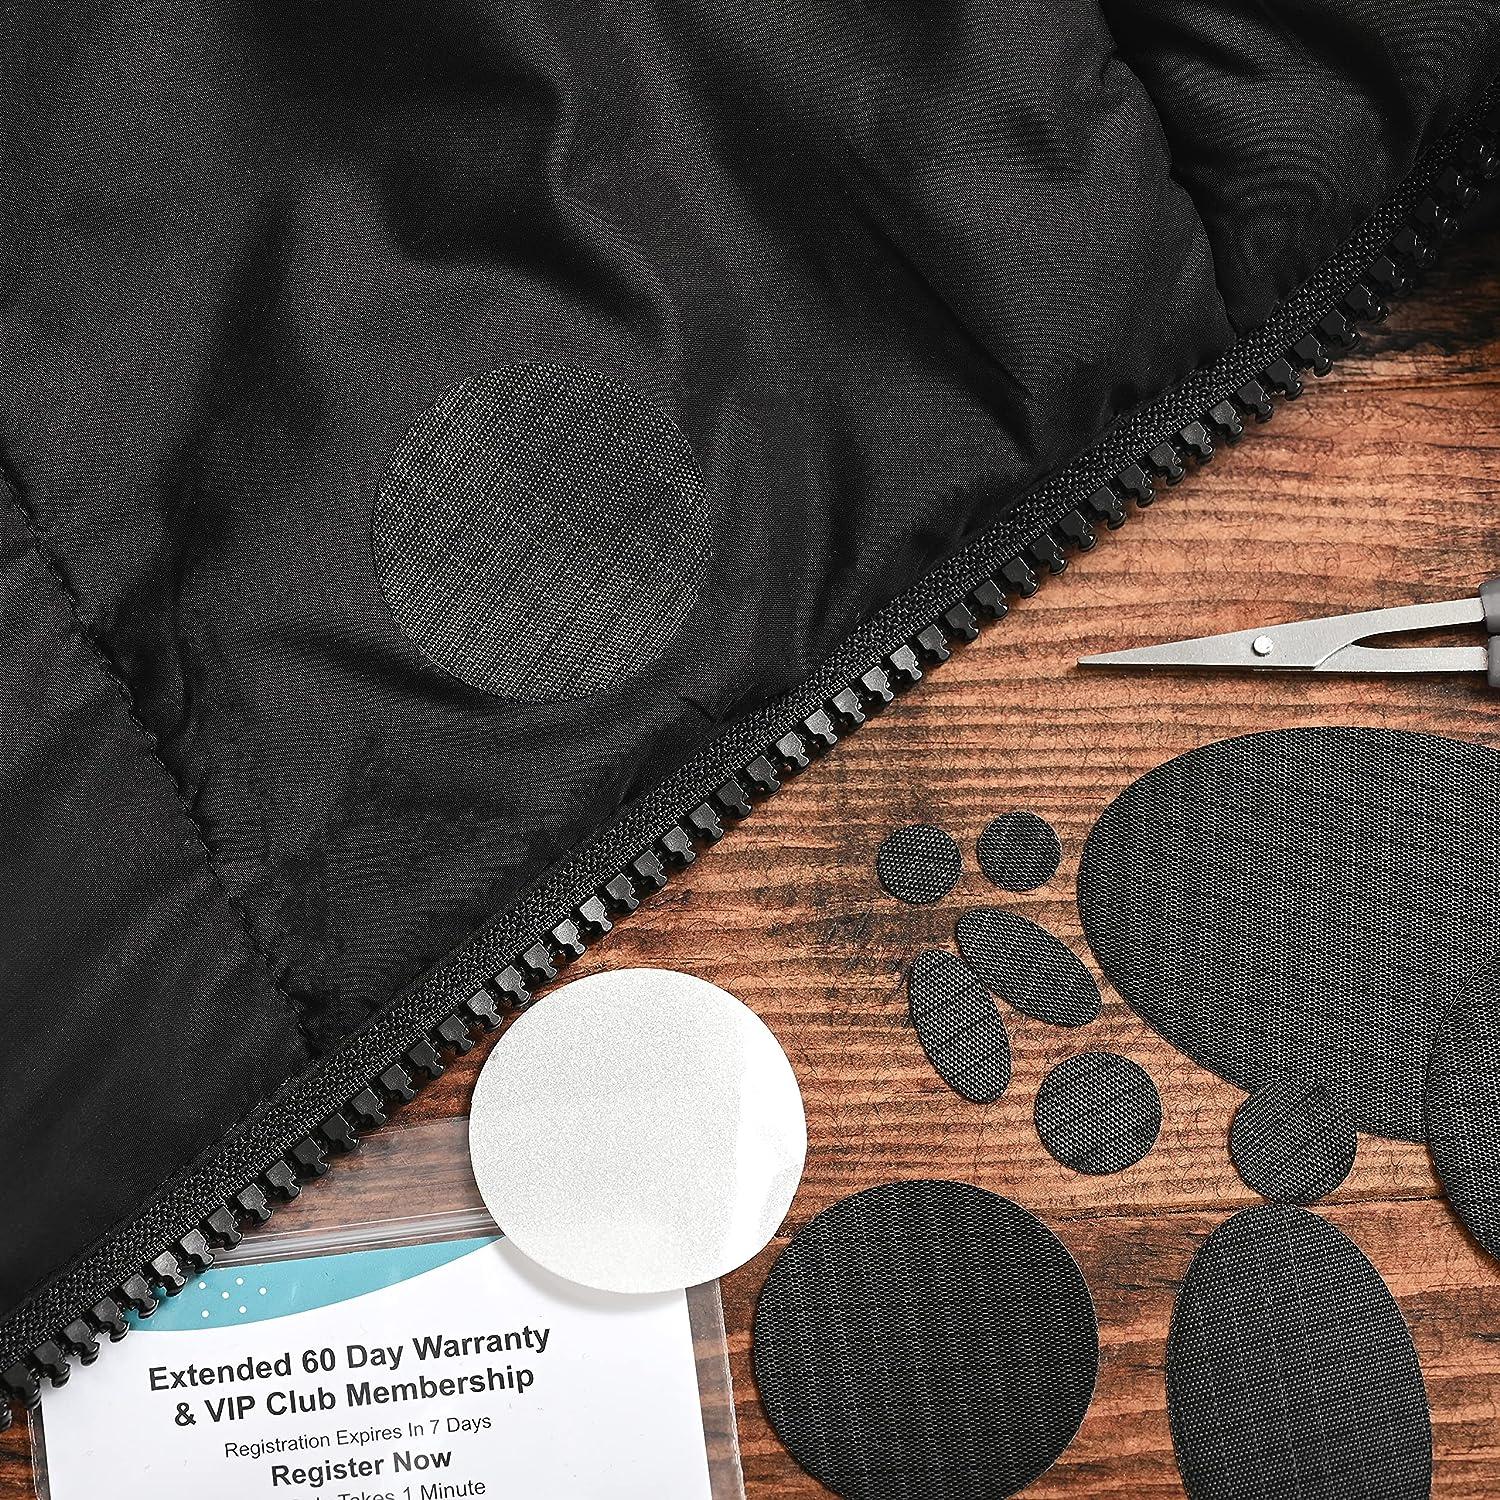 How to Fix a Hole in a Down Jacket